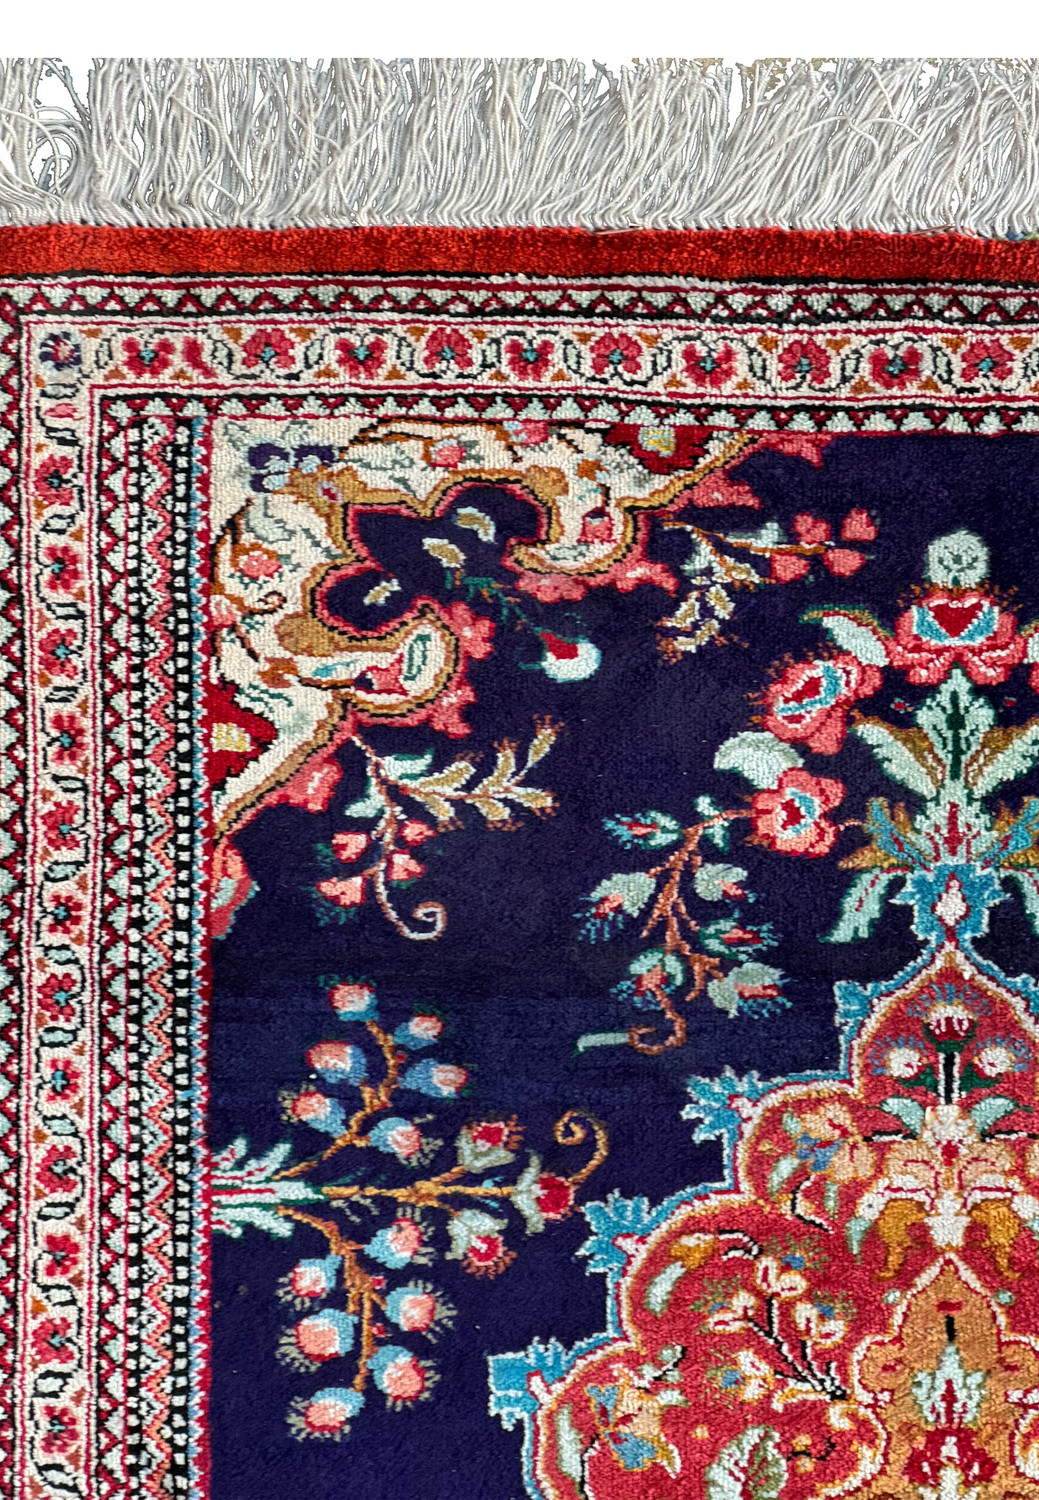 Edge of a Persian Qum silk rug with a close-up on the fine fringe and the ornamental border